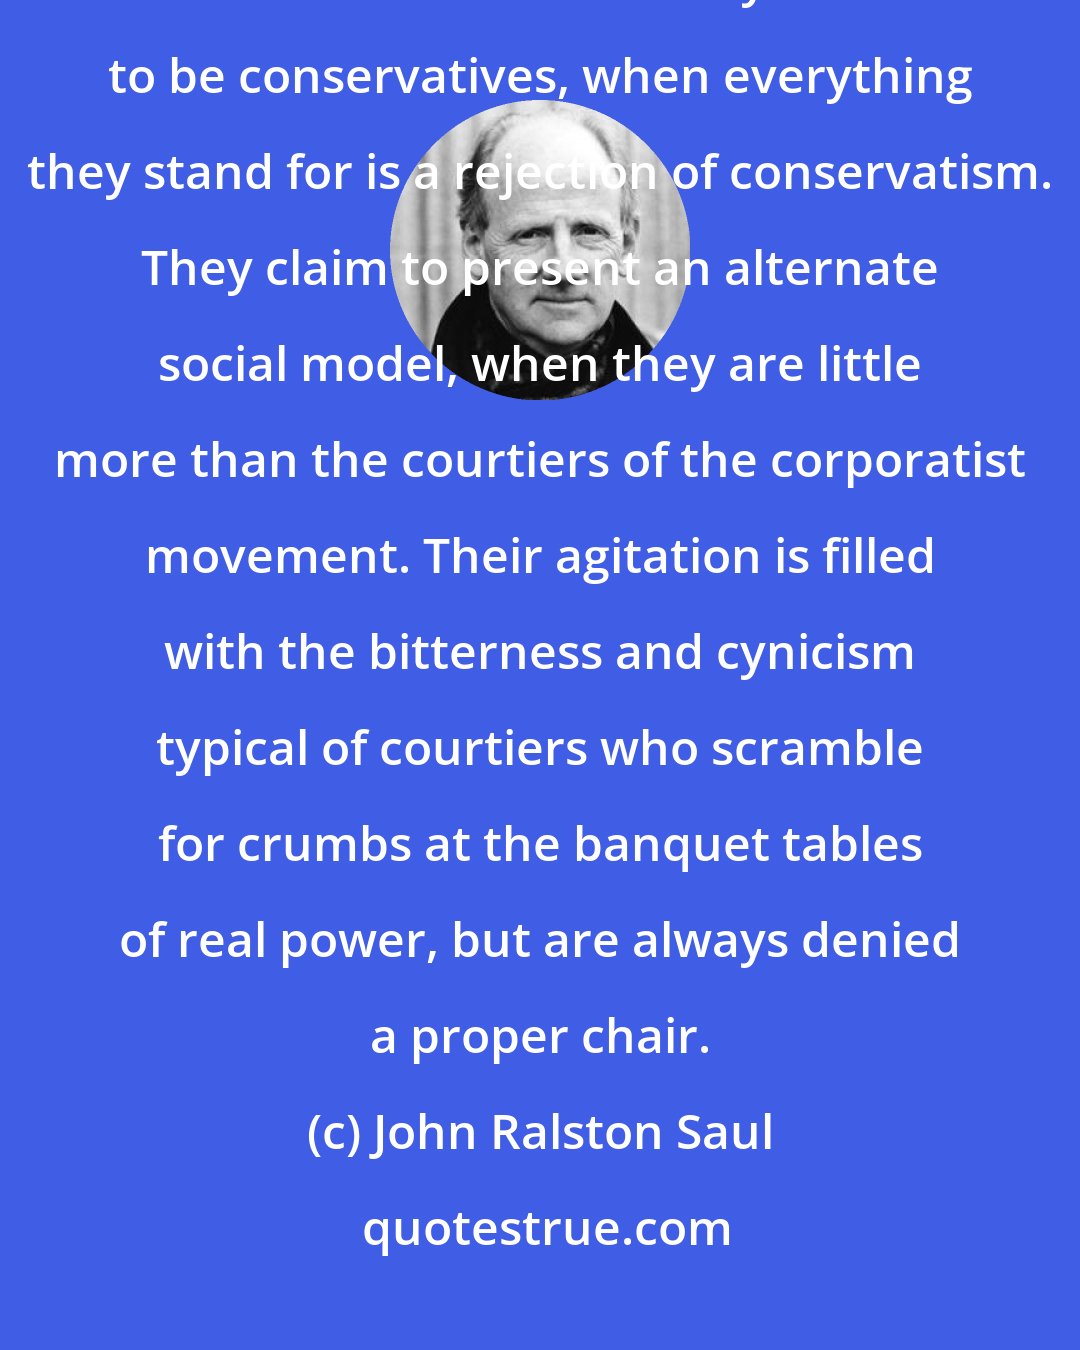 John Ralston Saul: The neo-conservatives, who are closely linked to the neo-corporatists, are rather different. They claim to be conservatives, when everything they stand for is a rejection of conservatism. They claim to present an alternate social model, when they are little more than the courtiers of the corporatist movement. Their agitation is filled with the bitterness and cynicism typical of courtiers who scramble for crumbs at the banquet tables of real power, but are always denied a proper chair.